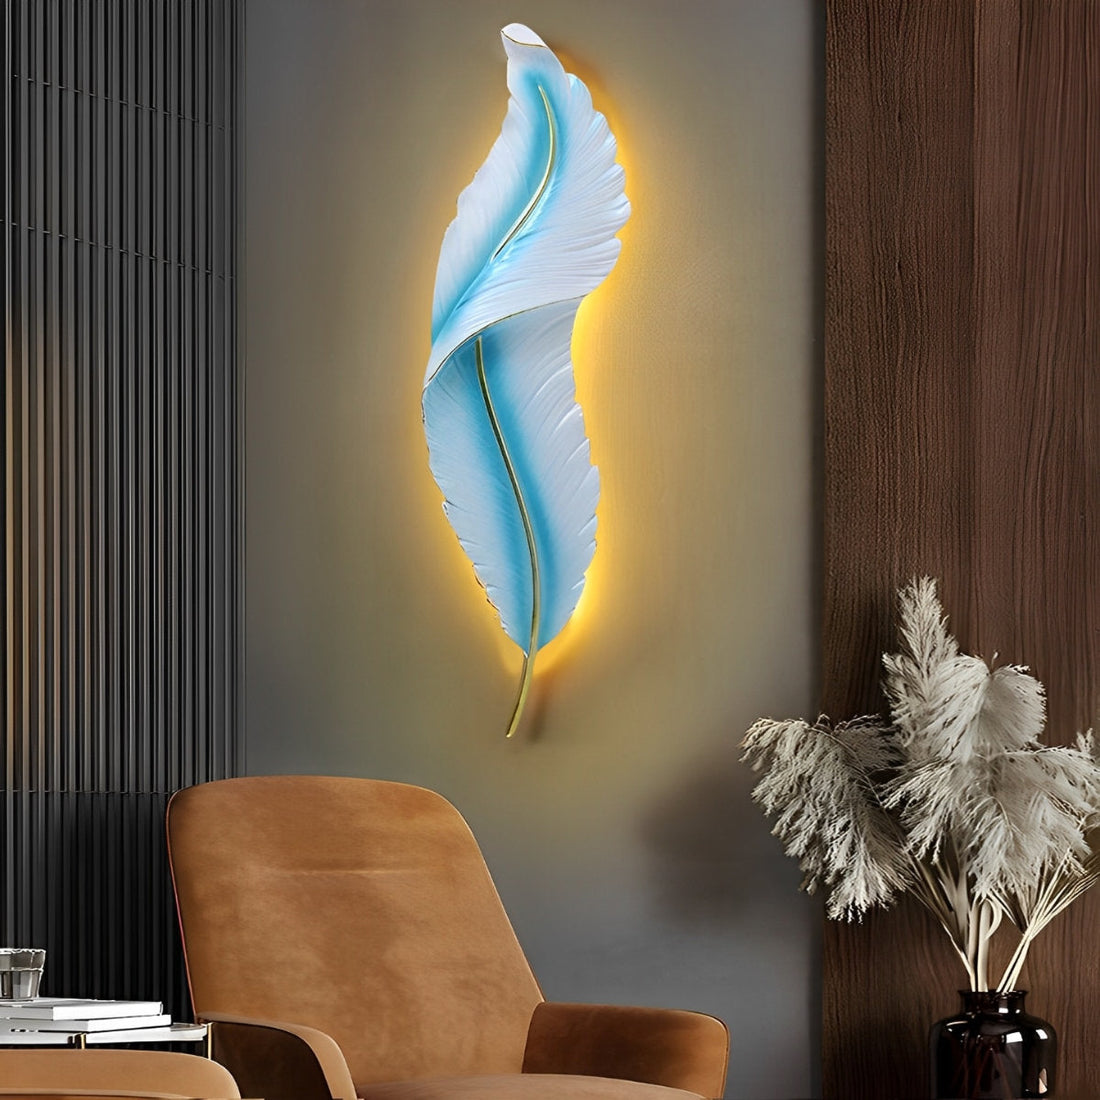 Creative Feathers LED White Luxury Modern Wall Lamp Wall Sconce Lighting Interior Decoration Lighting Fixture - Flyachilles